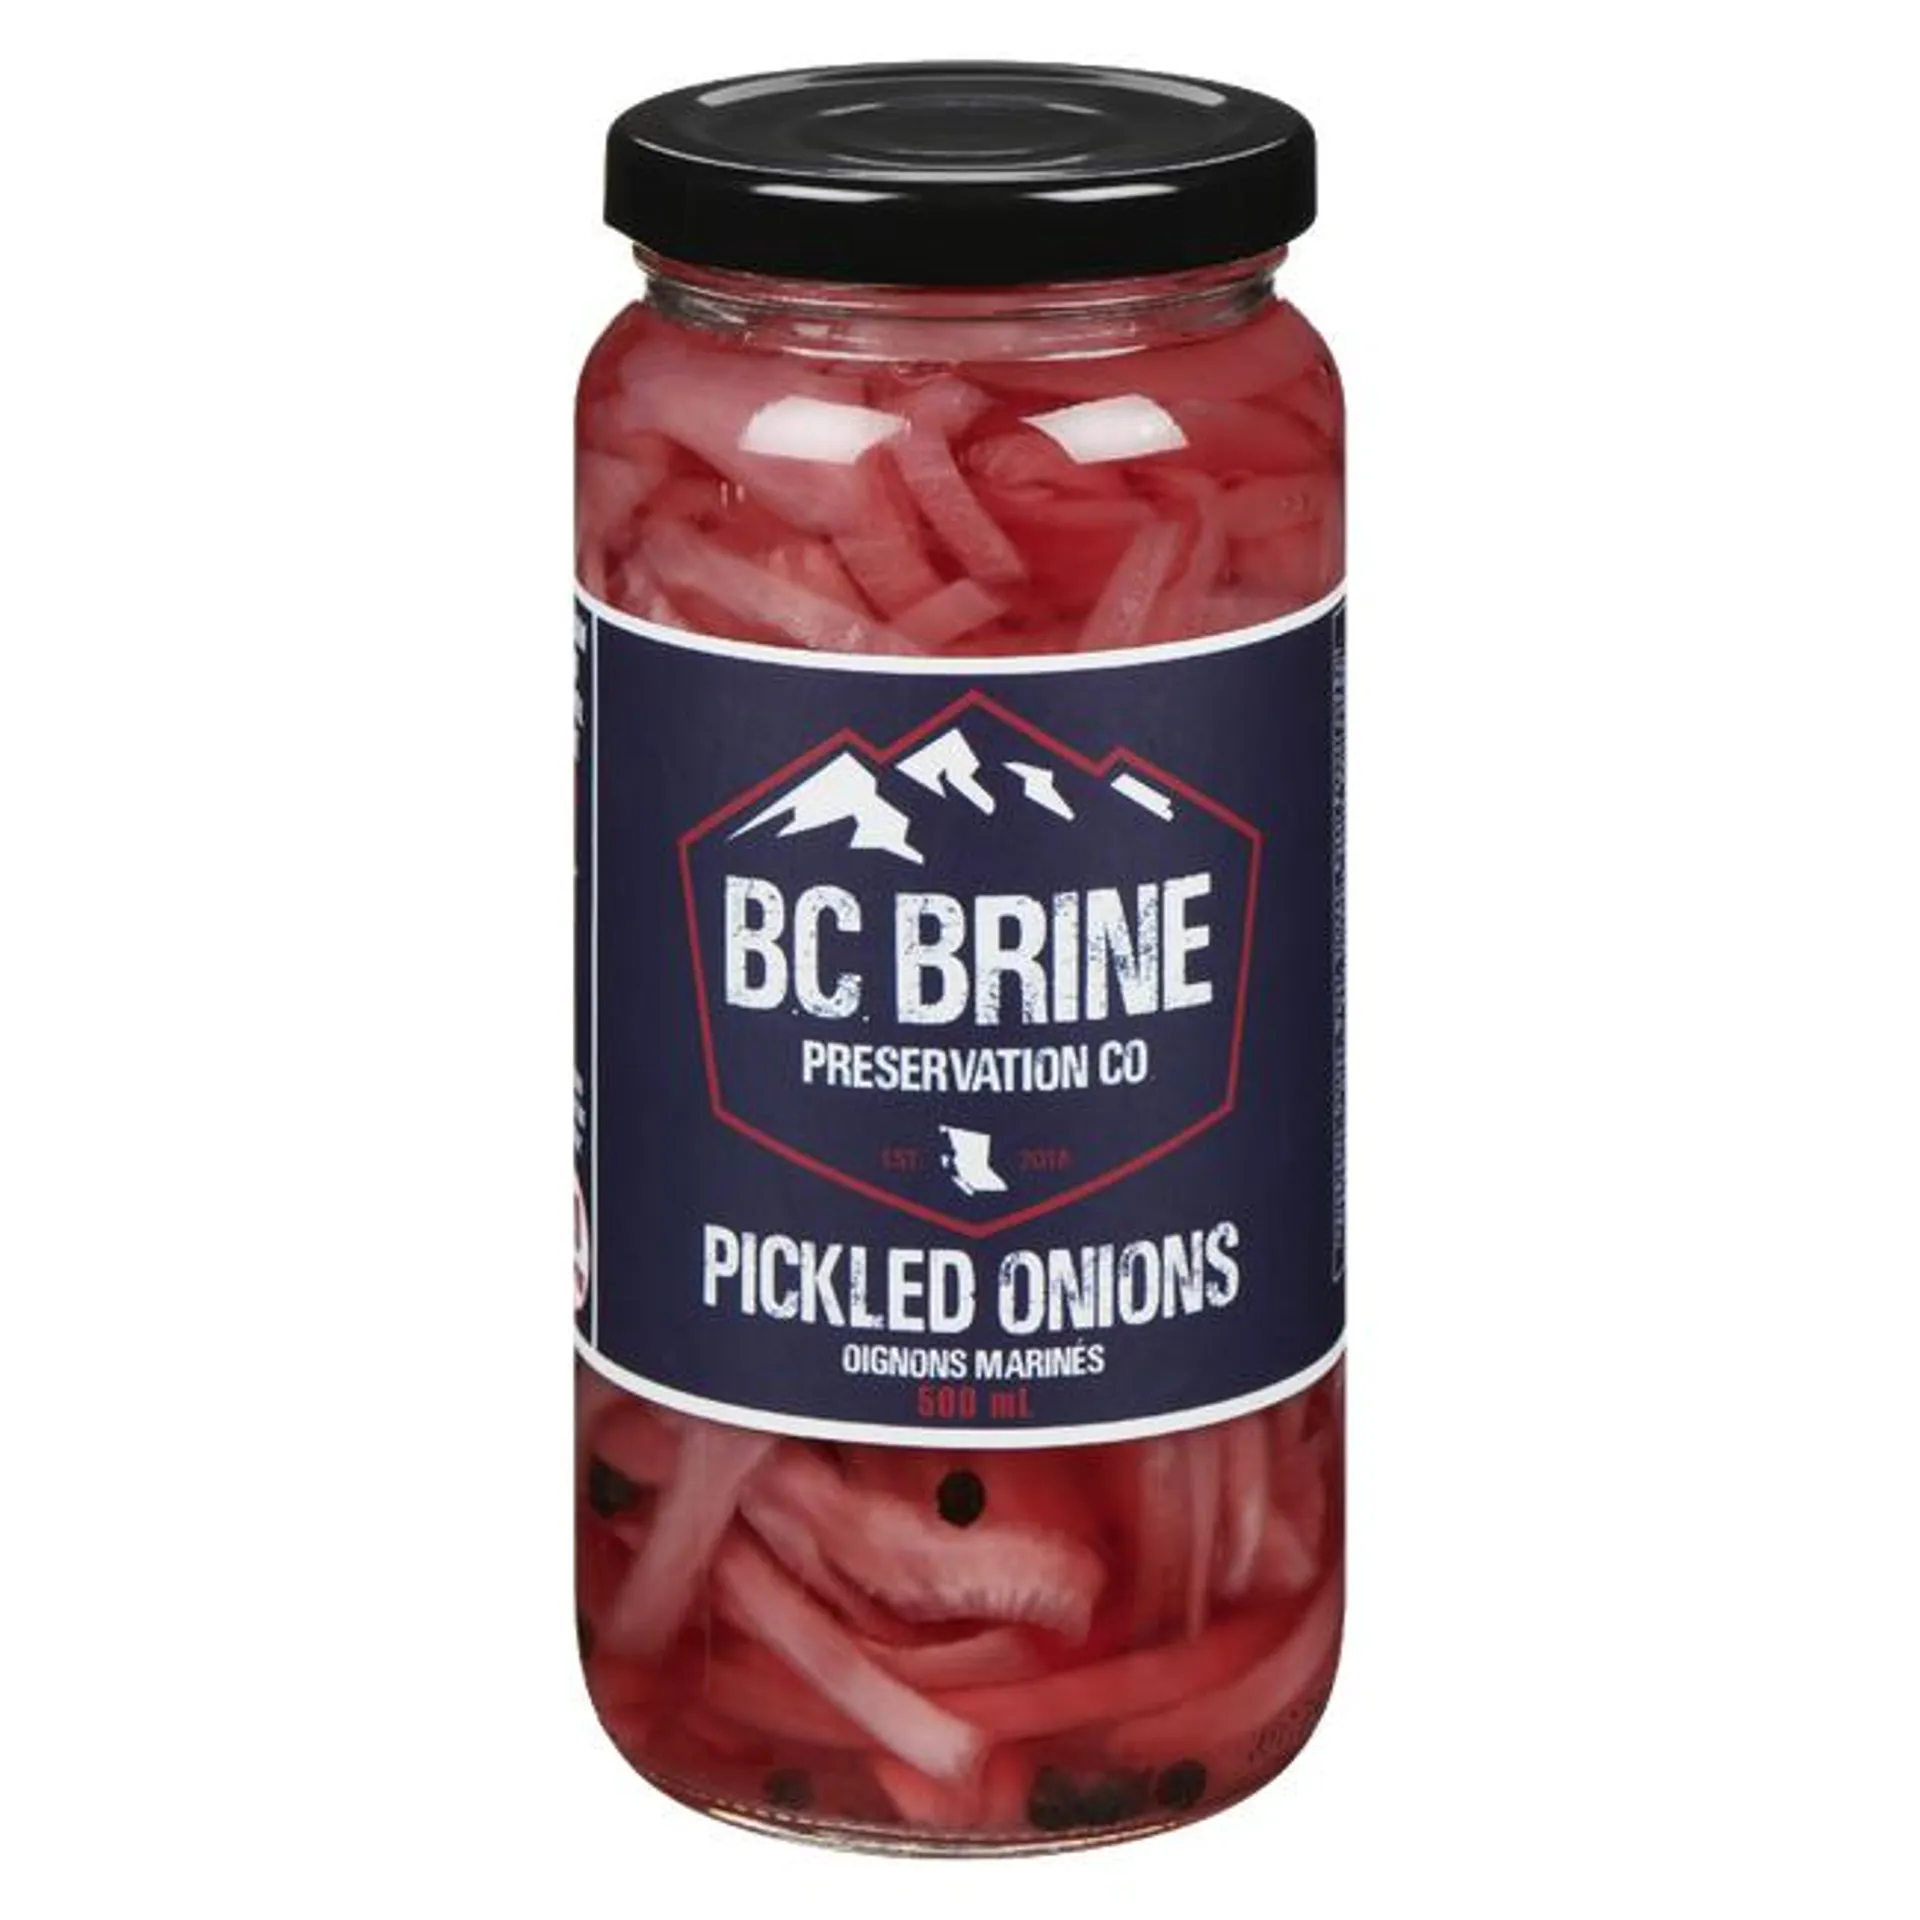 B.C. Brine Preservation Co. - Pickled Onions